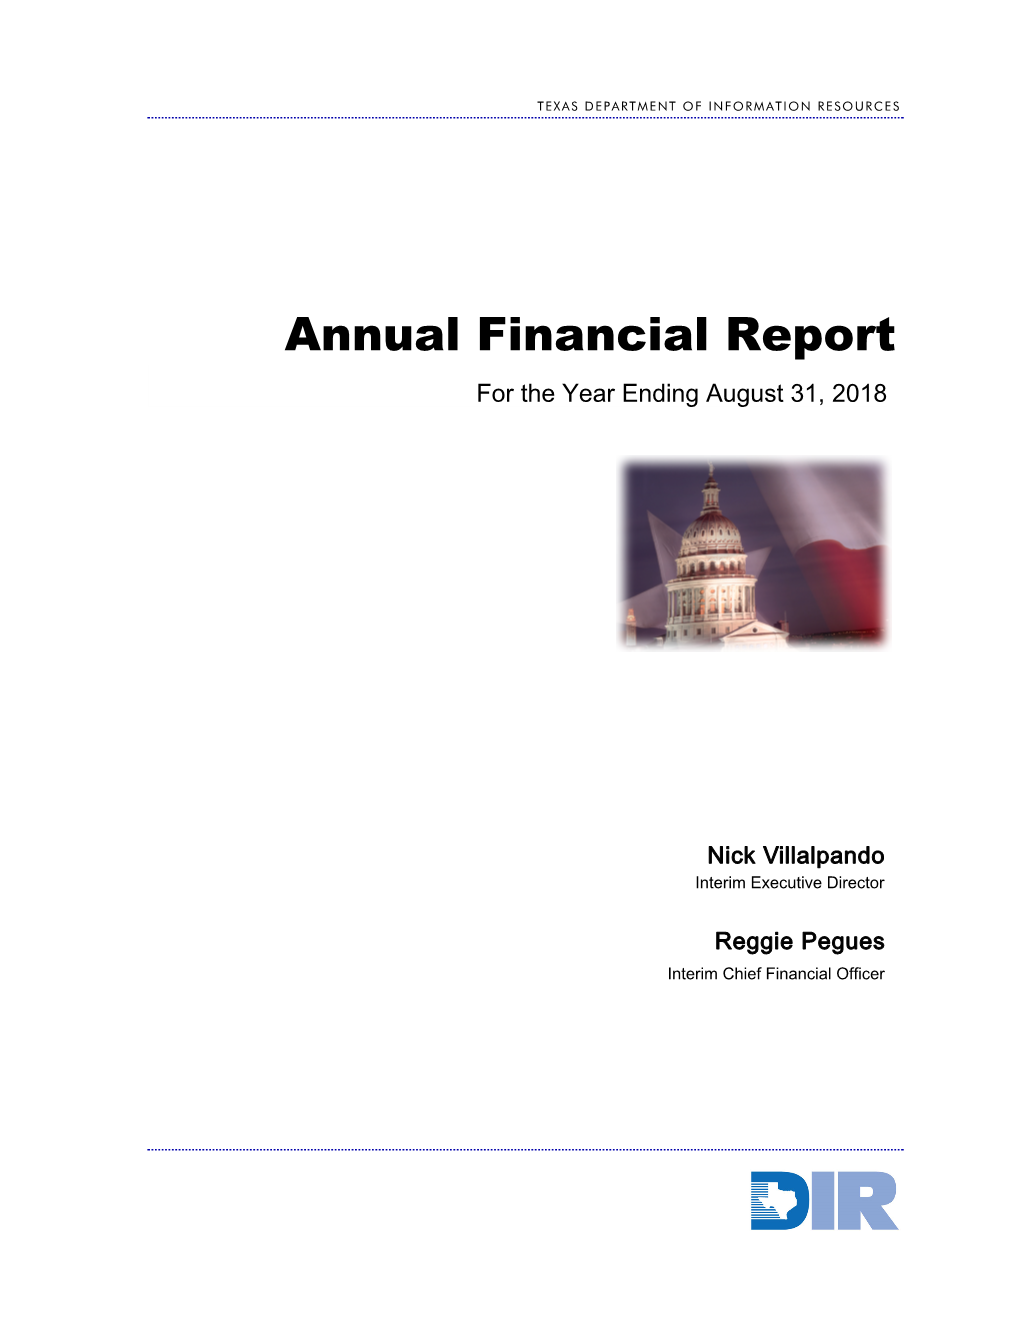 Annual Financial Report for the Year Ending August 31, 2018